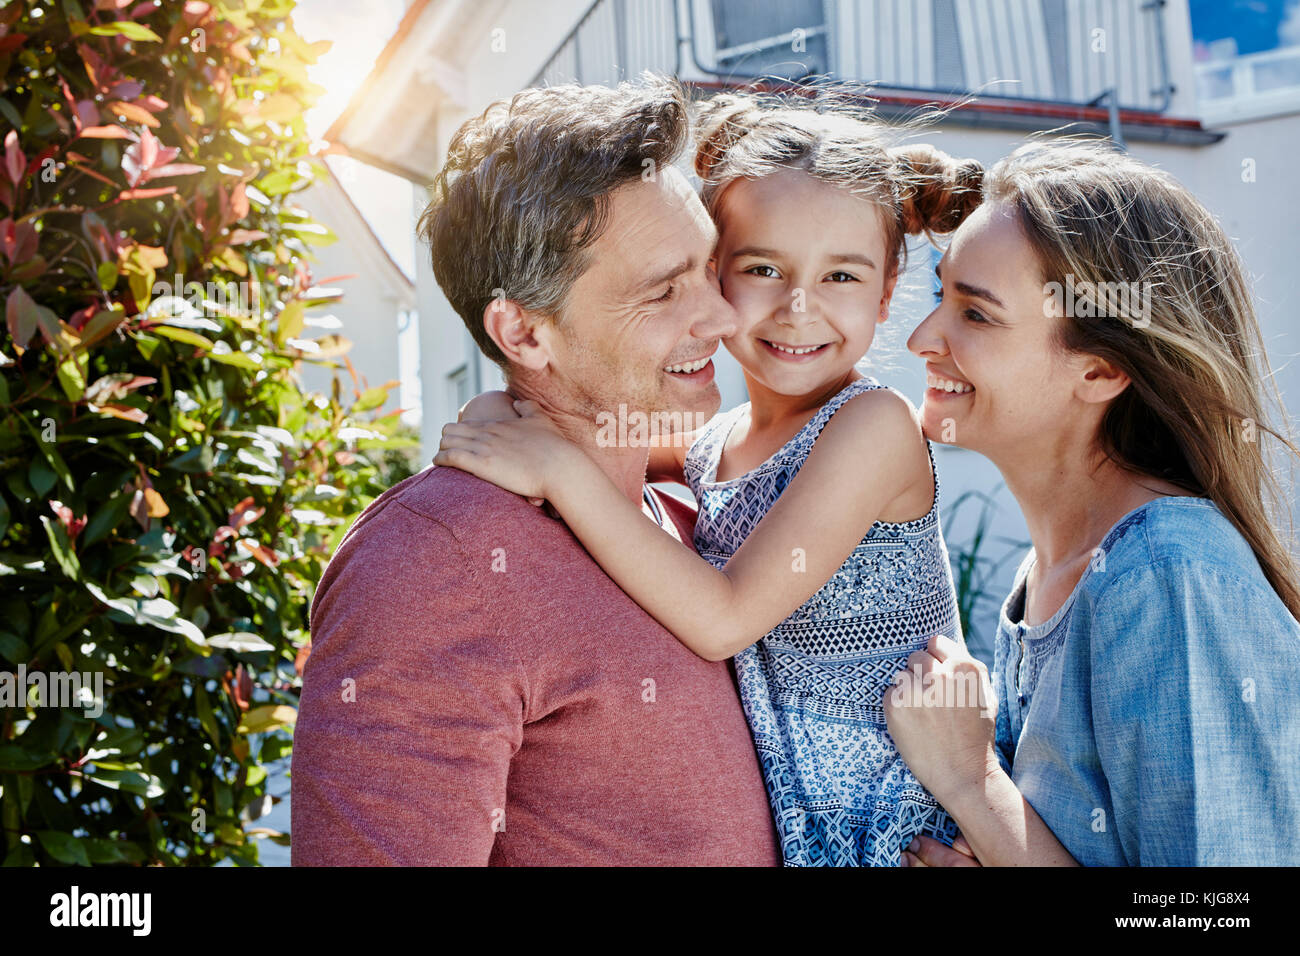 Portrait of happy family in front of their home Stock Photo